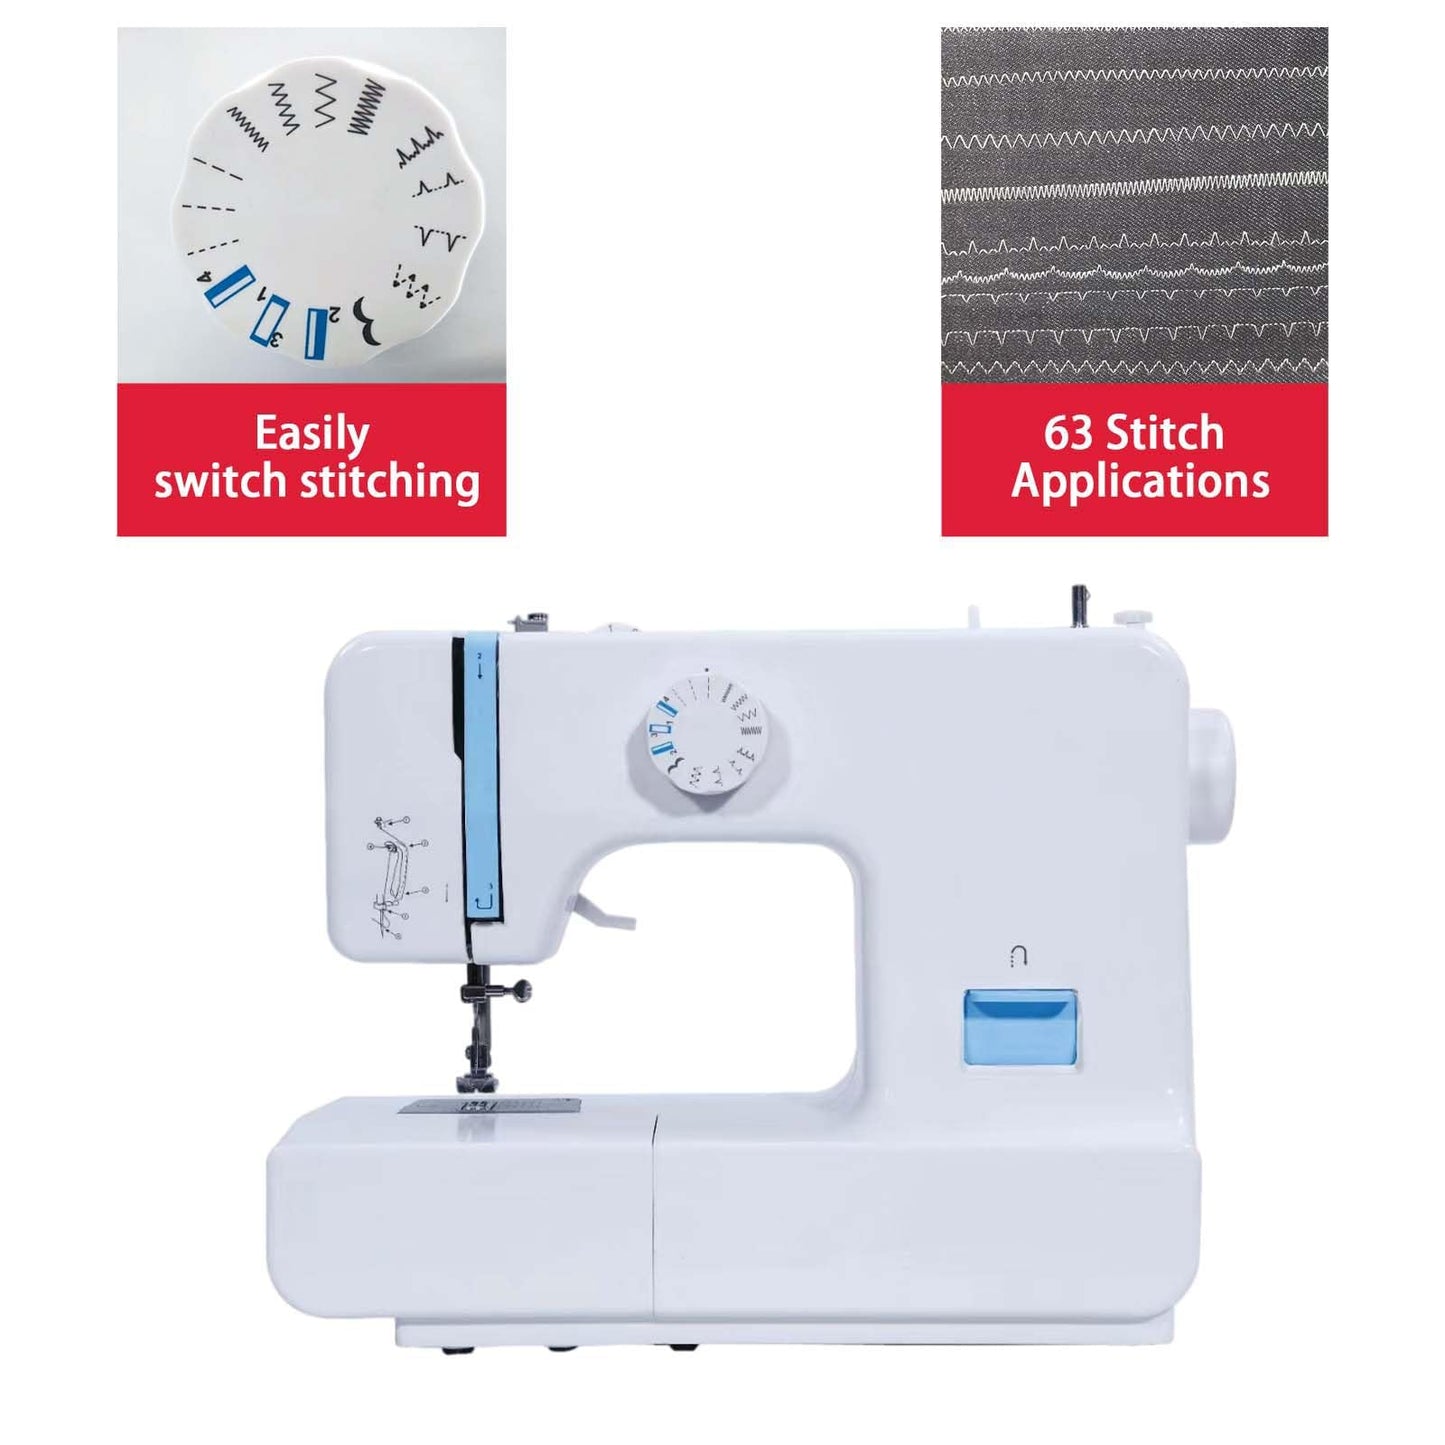 Uttuio Mechanical Sewing Machine With Accessory Kit - 63 Stitch Applications - Easy To Use & Great for Beginners (Blue)